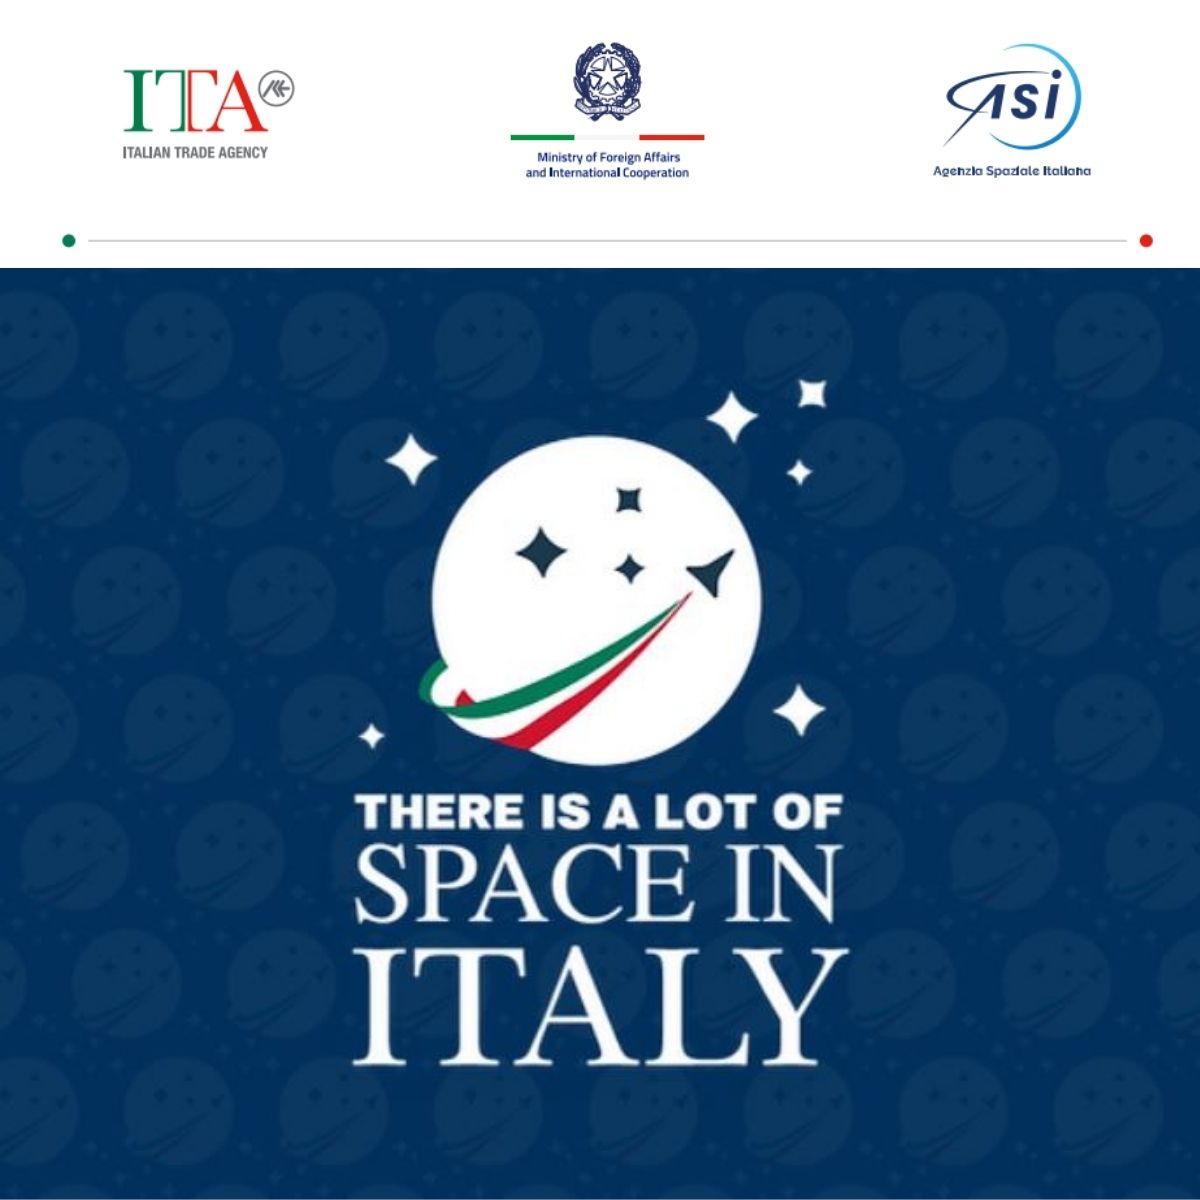 #DidYouKnow that... THERE IS A LOT OF #SPACE IN #ITALY? We are proud to collaborate with @ASI_spazio to officially launch our new campaign “There’s a Lot of Space in Italy”, highlighting the impact Italy has made to the global Aerospace landscape. #SpaceInItaly #ItalianSpace